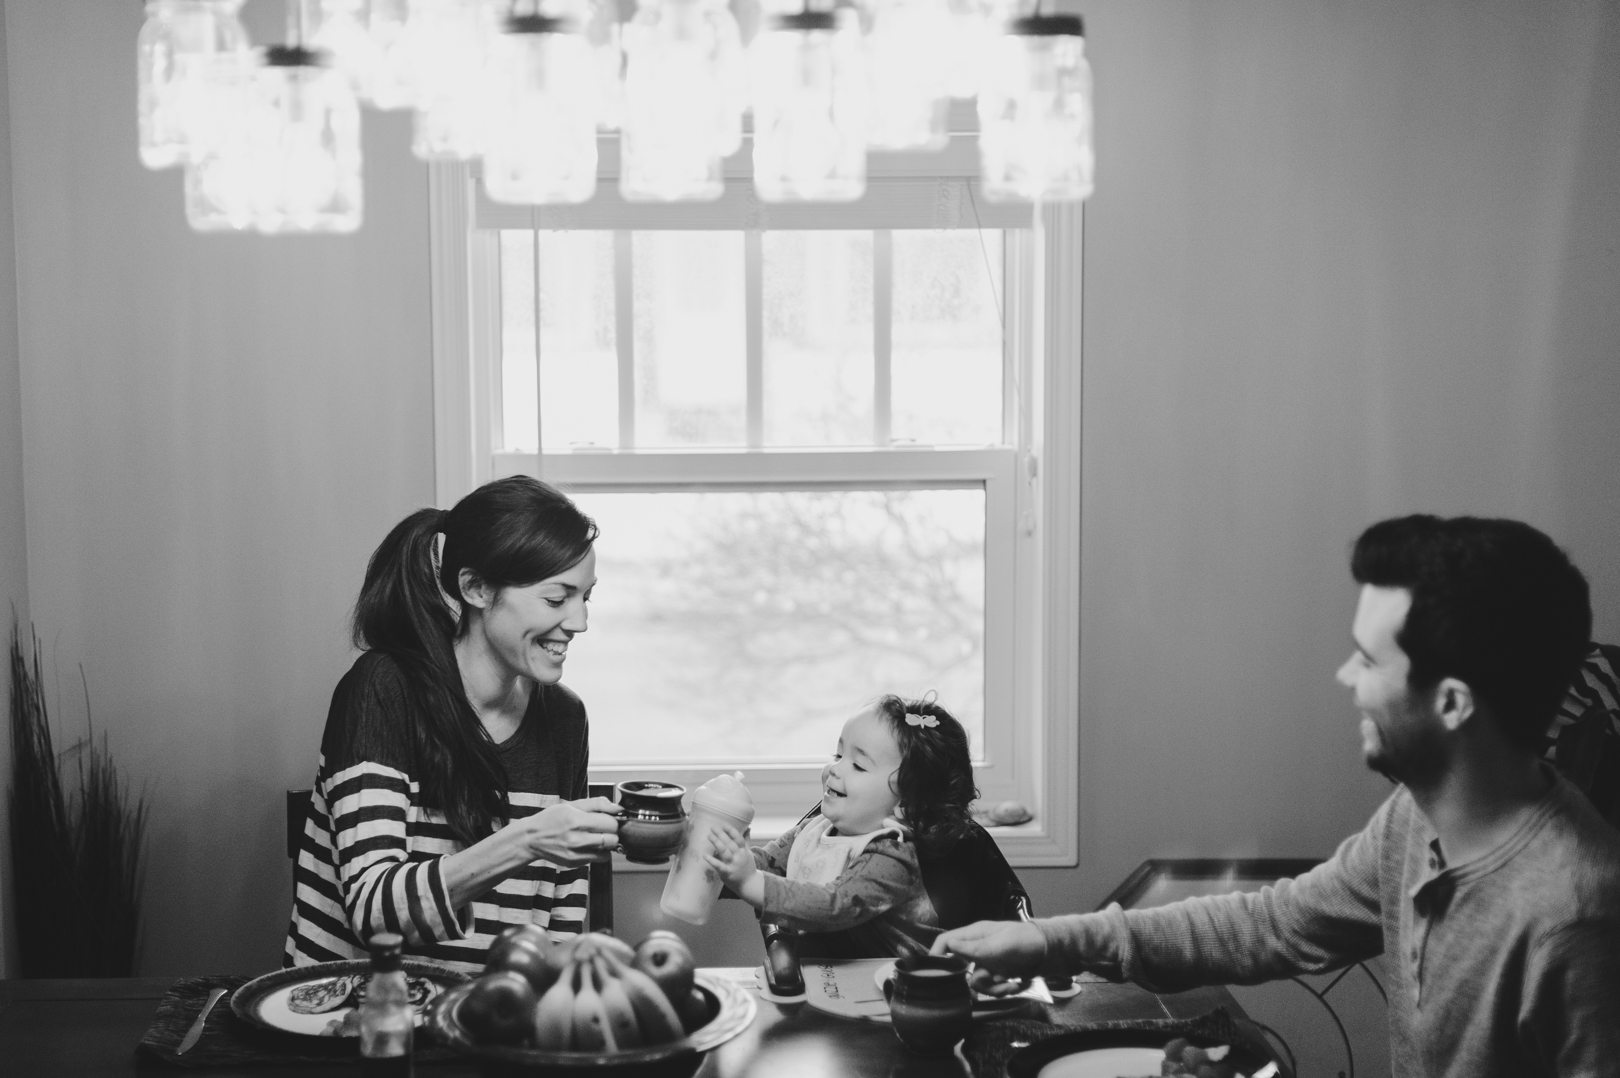 Family cheers during Saturday morning breakfast at the table. Dad and daughter playing together on Saturday morning. Photo by Ashley Notley Photography.